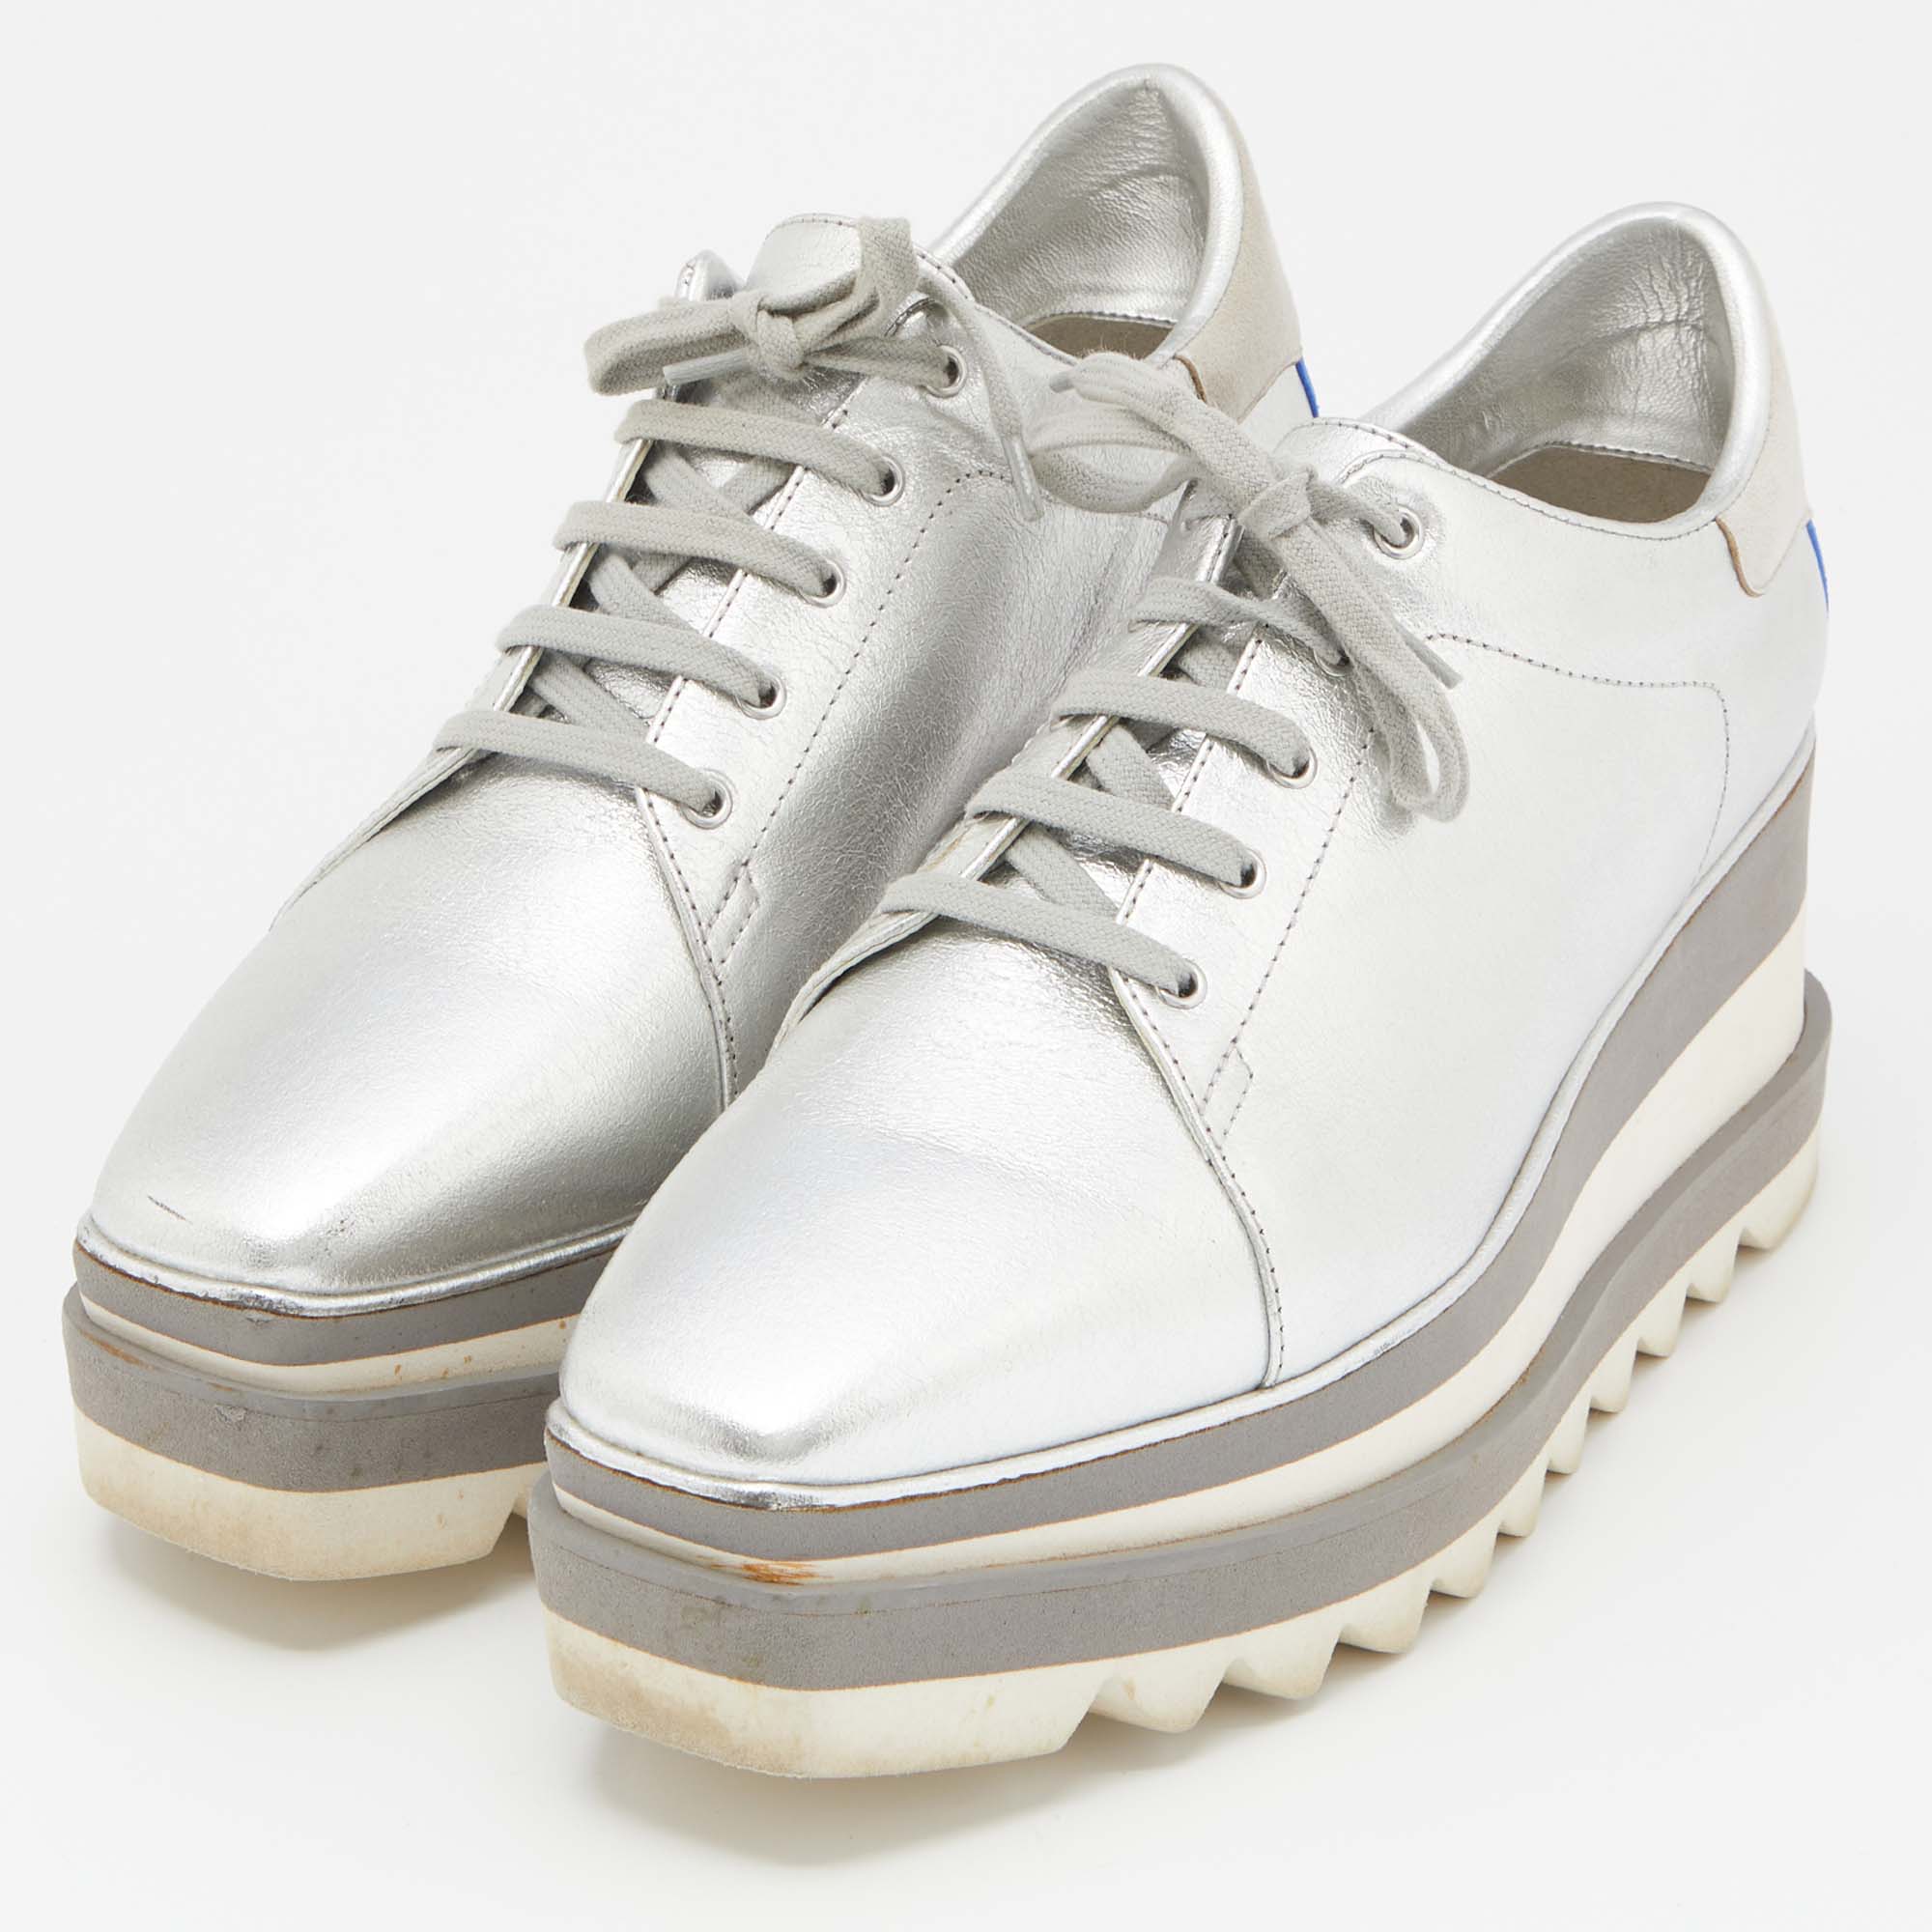 

Stella McCartney Metallic Silver Faux Leather and Faux Suede Elyse Sneakers Size